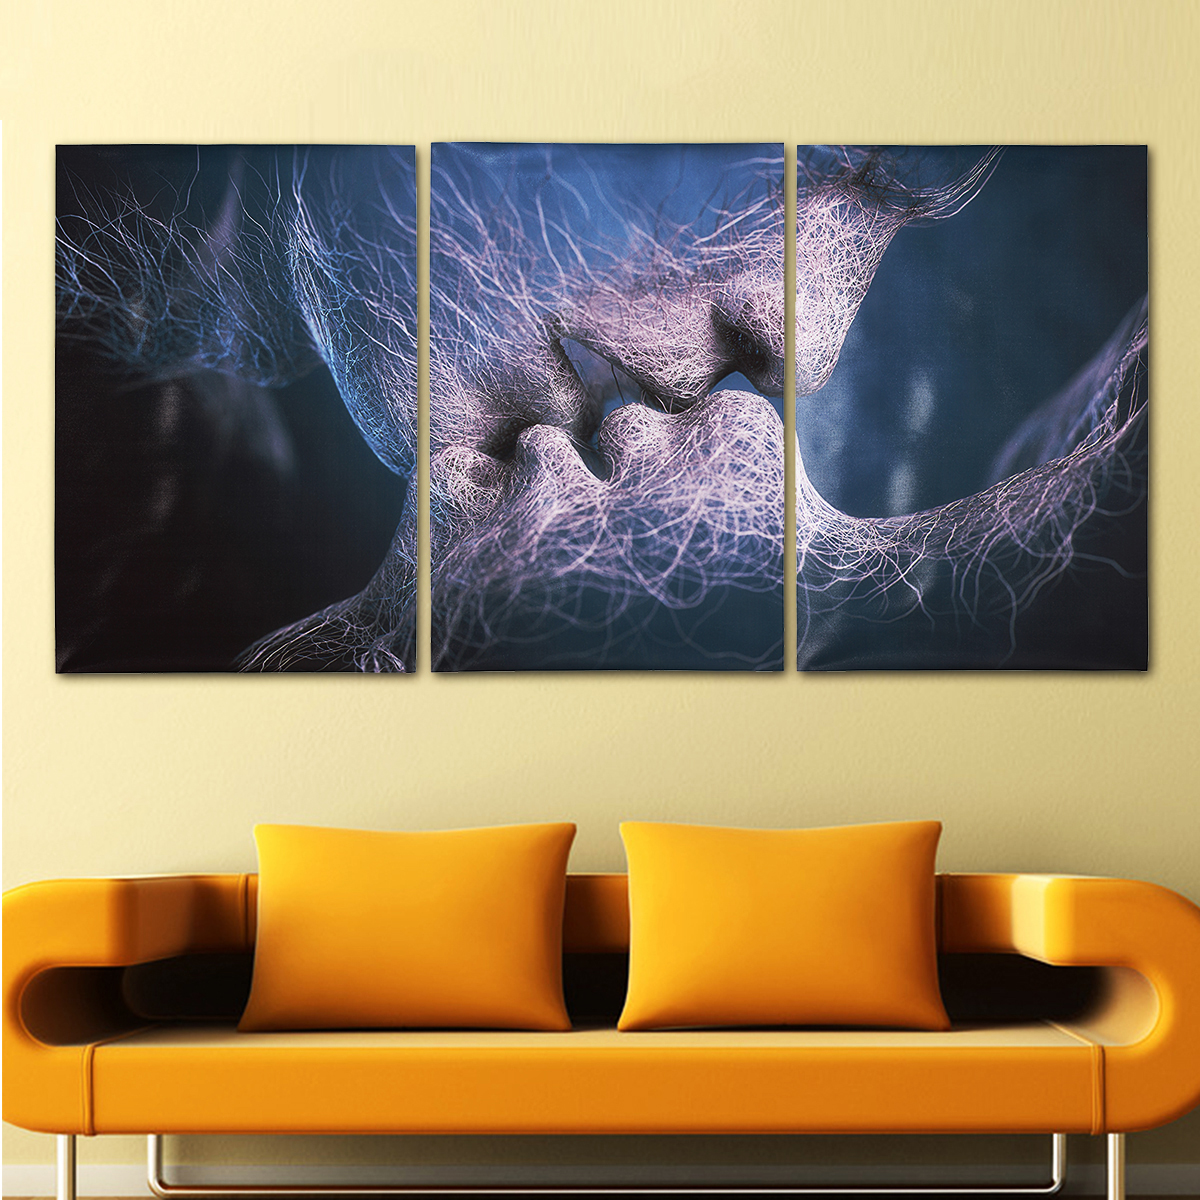 3Pcs-Love-Kiss-Abstract-Canvas-Print-Paintings-Pictures-Home-Room-Decor-Unframed-1354927